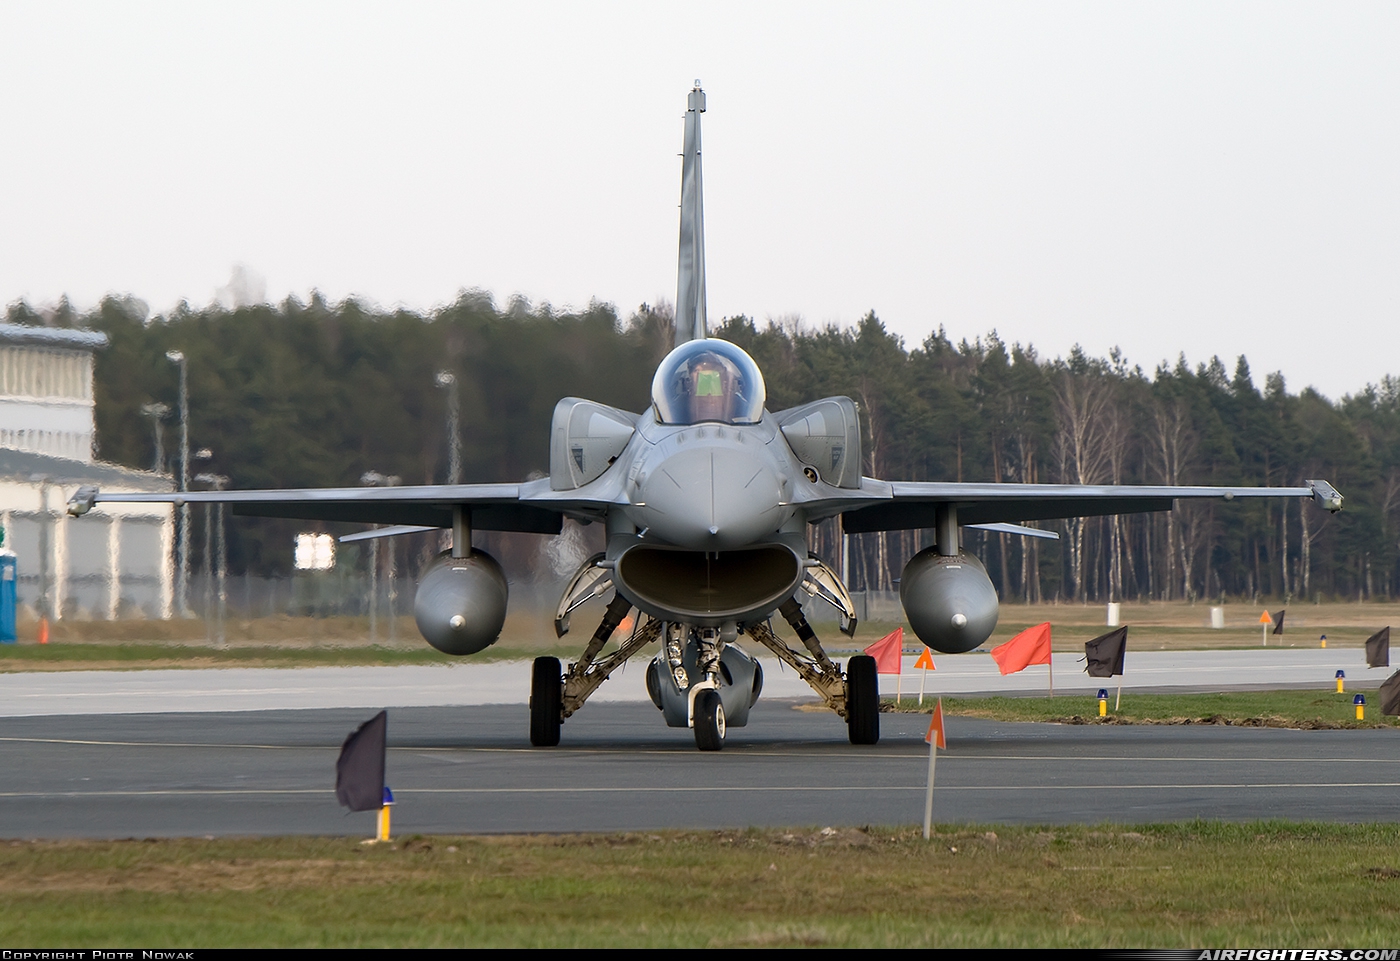 Poland - Air Force General Dynamics F-16C Fighting Falcon 4063 at Lask (EPLK), Poland